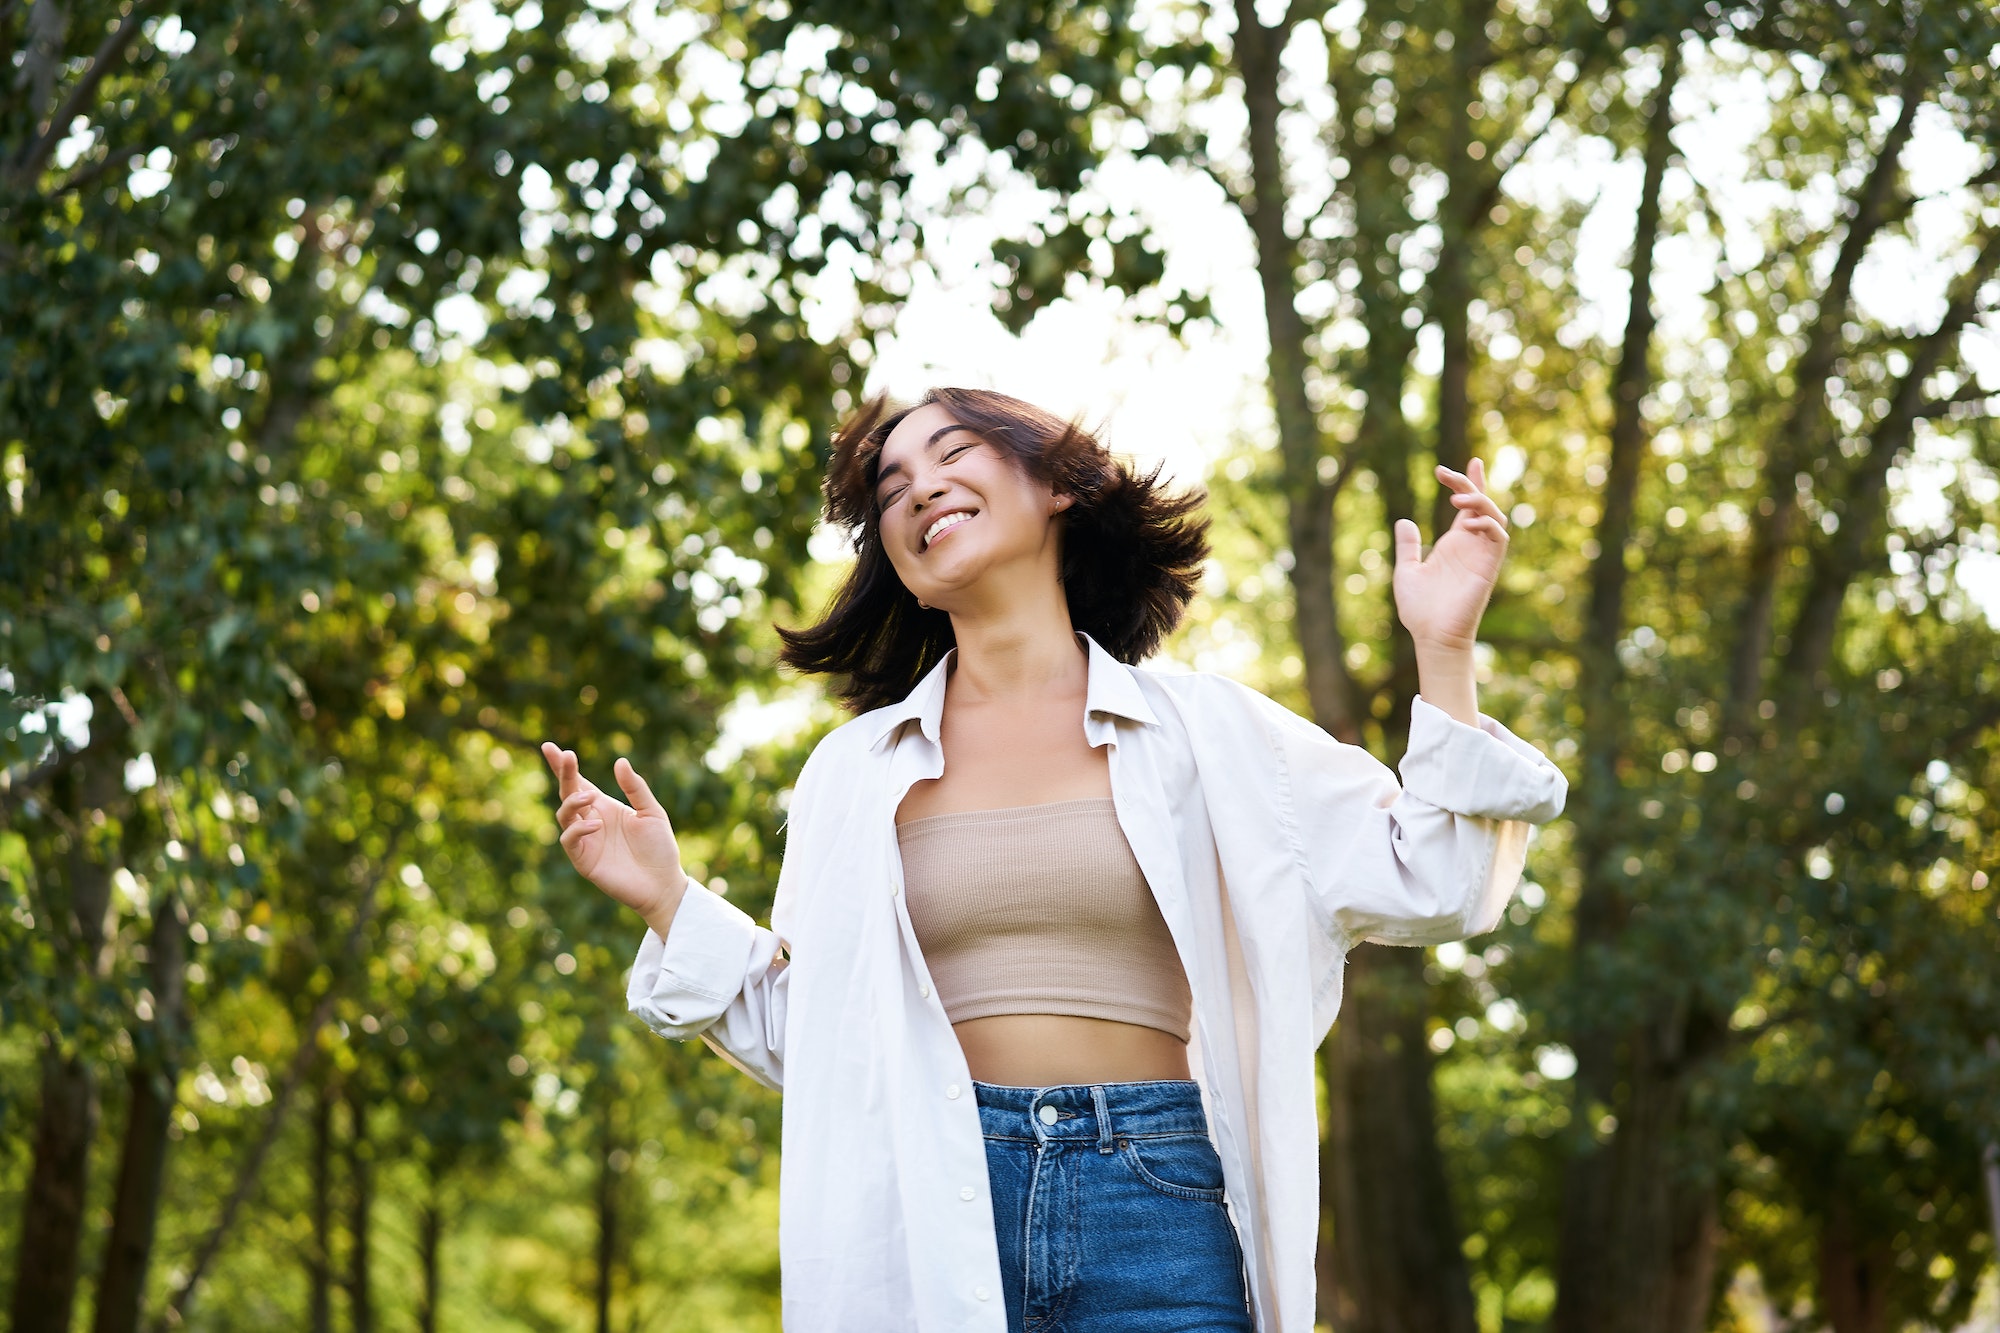 Happy people. Carefree asian girl dancing and enjoying the walk in park, feeling happiness and joy